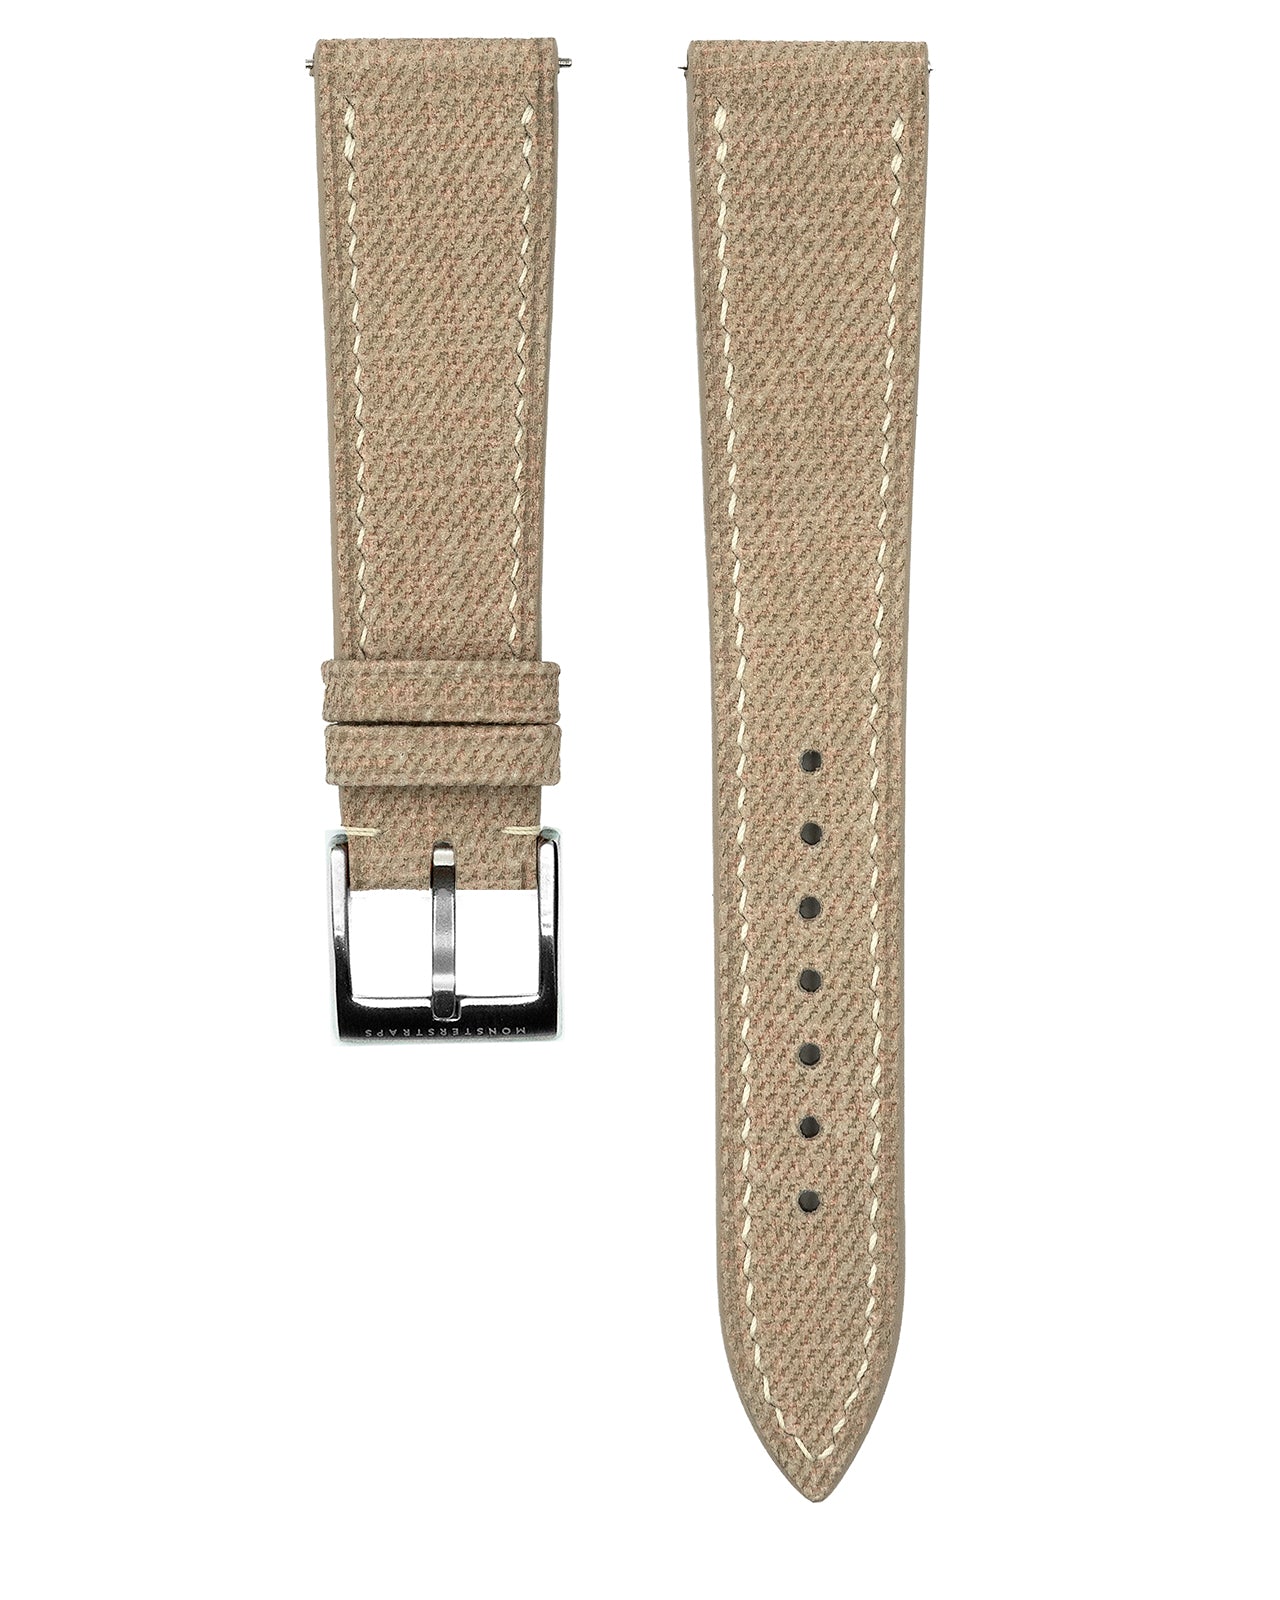 Fabric Leather Strap (Beige)